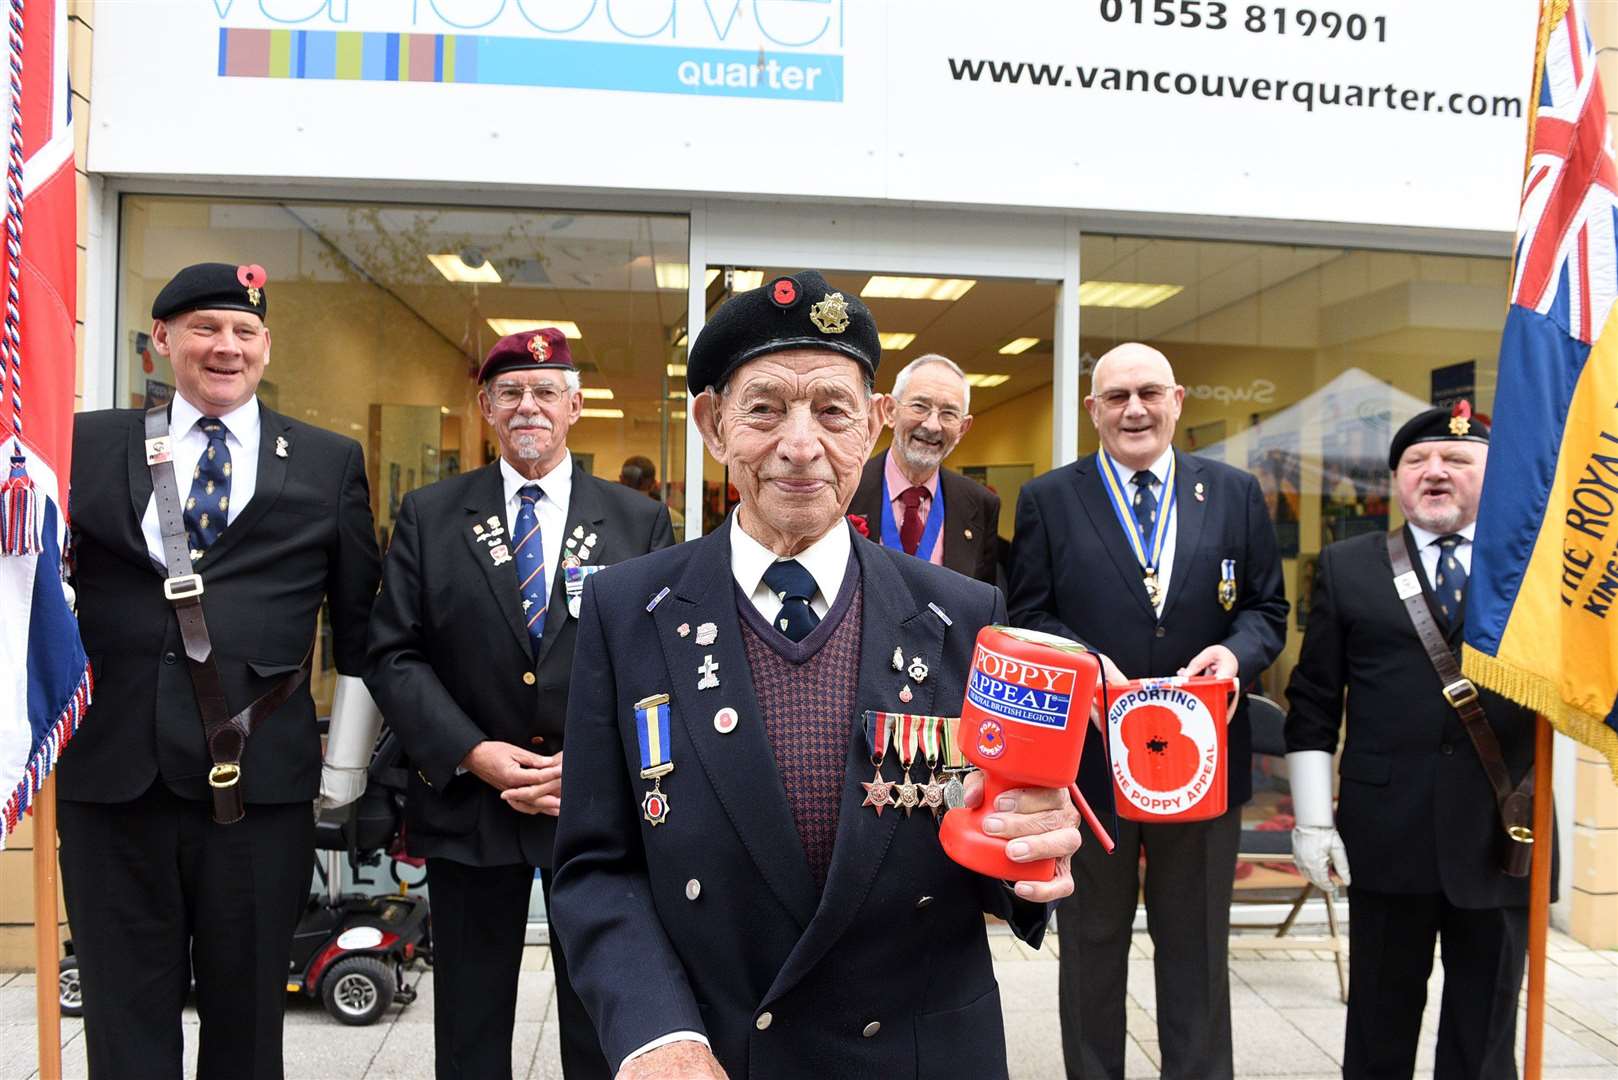 Launch of Lynn Royal British Legion branch Poppy Appeal in 2017.
From left to right, at the back are Robert Hipkin, Paul Chase, Honorary Alderman John Loveless, David Norman and Paul Giles, with Cyril Route, front